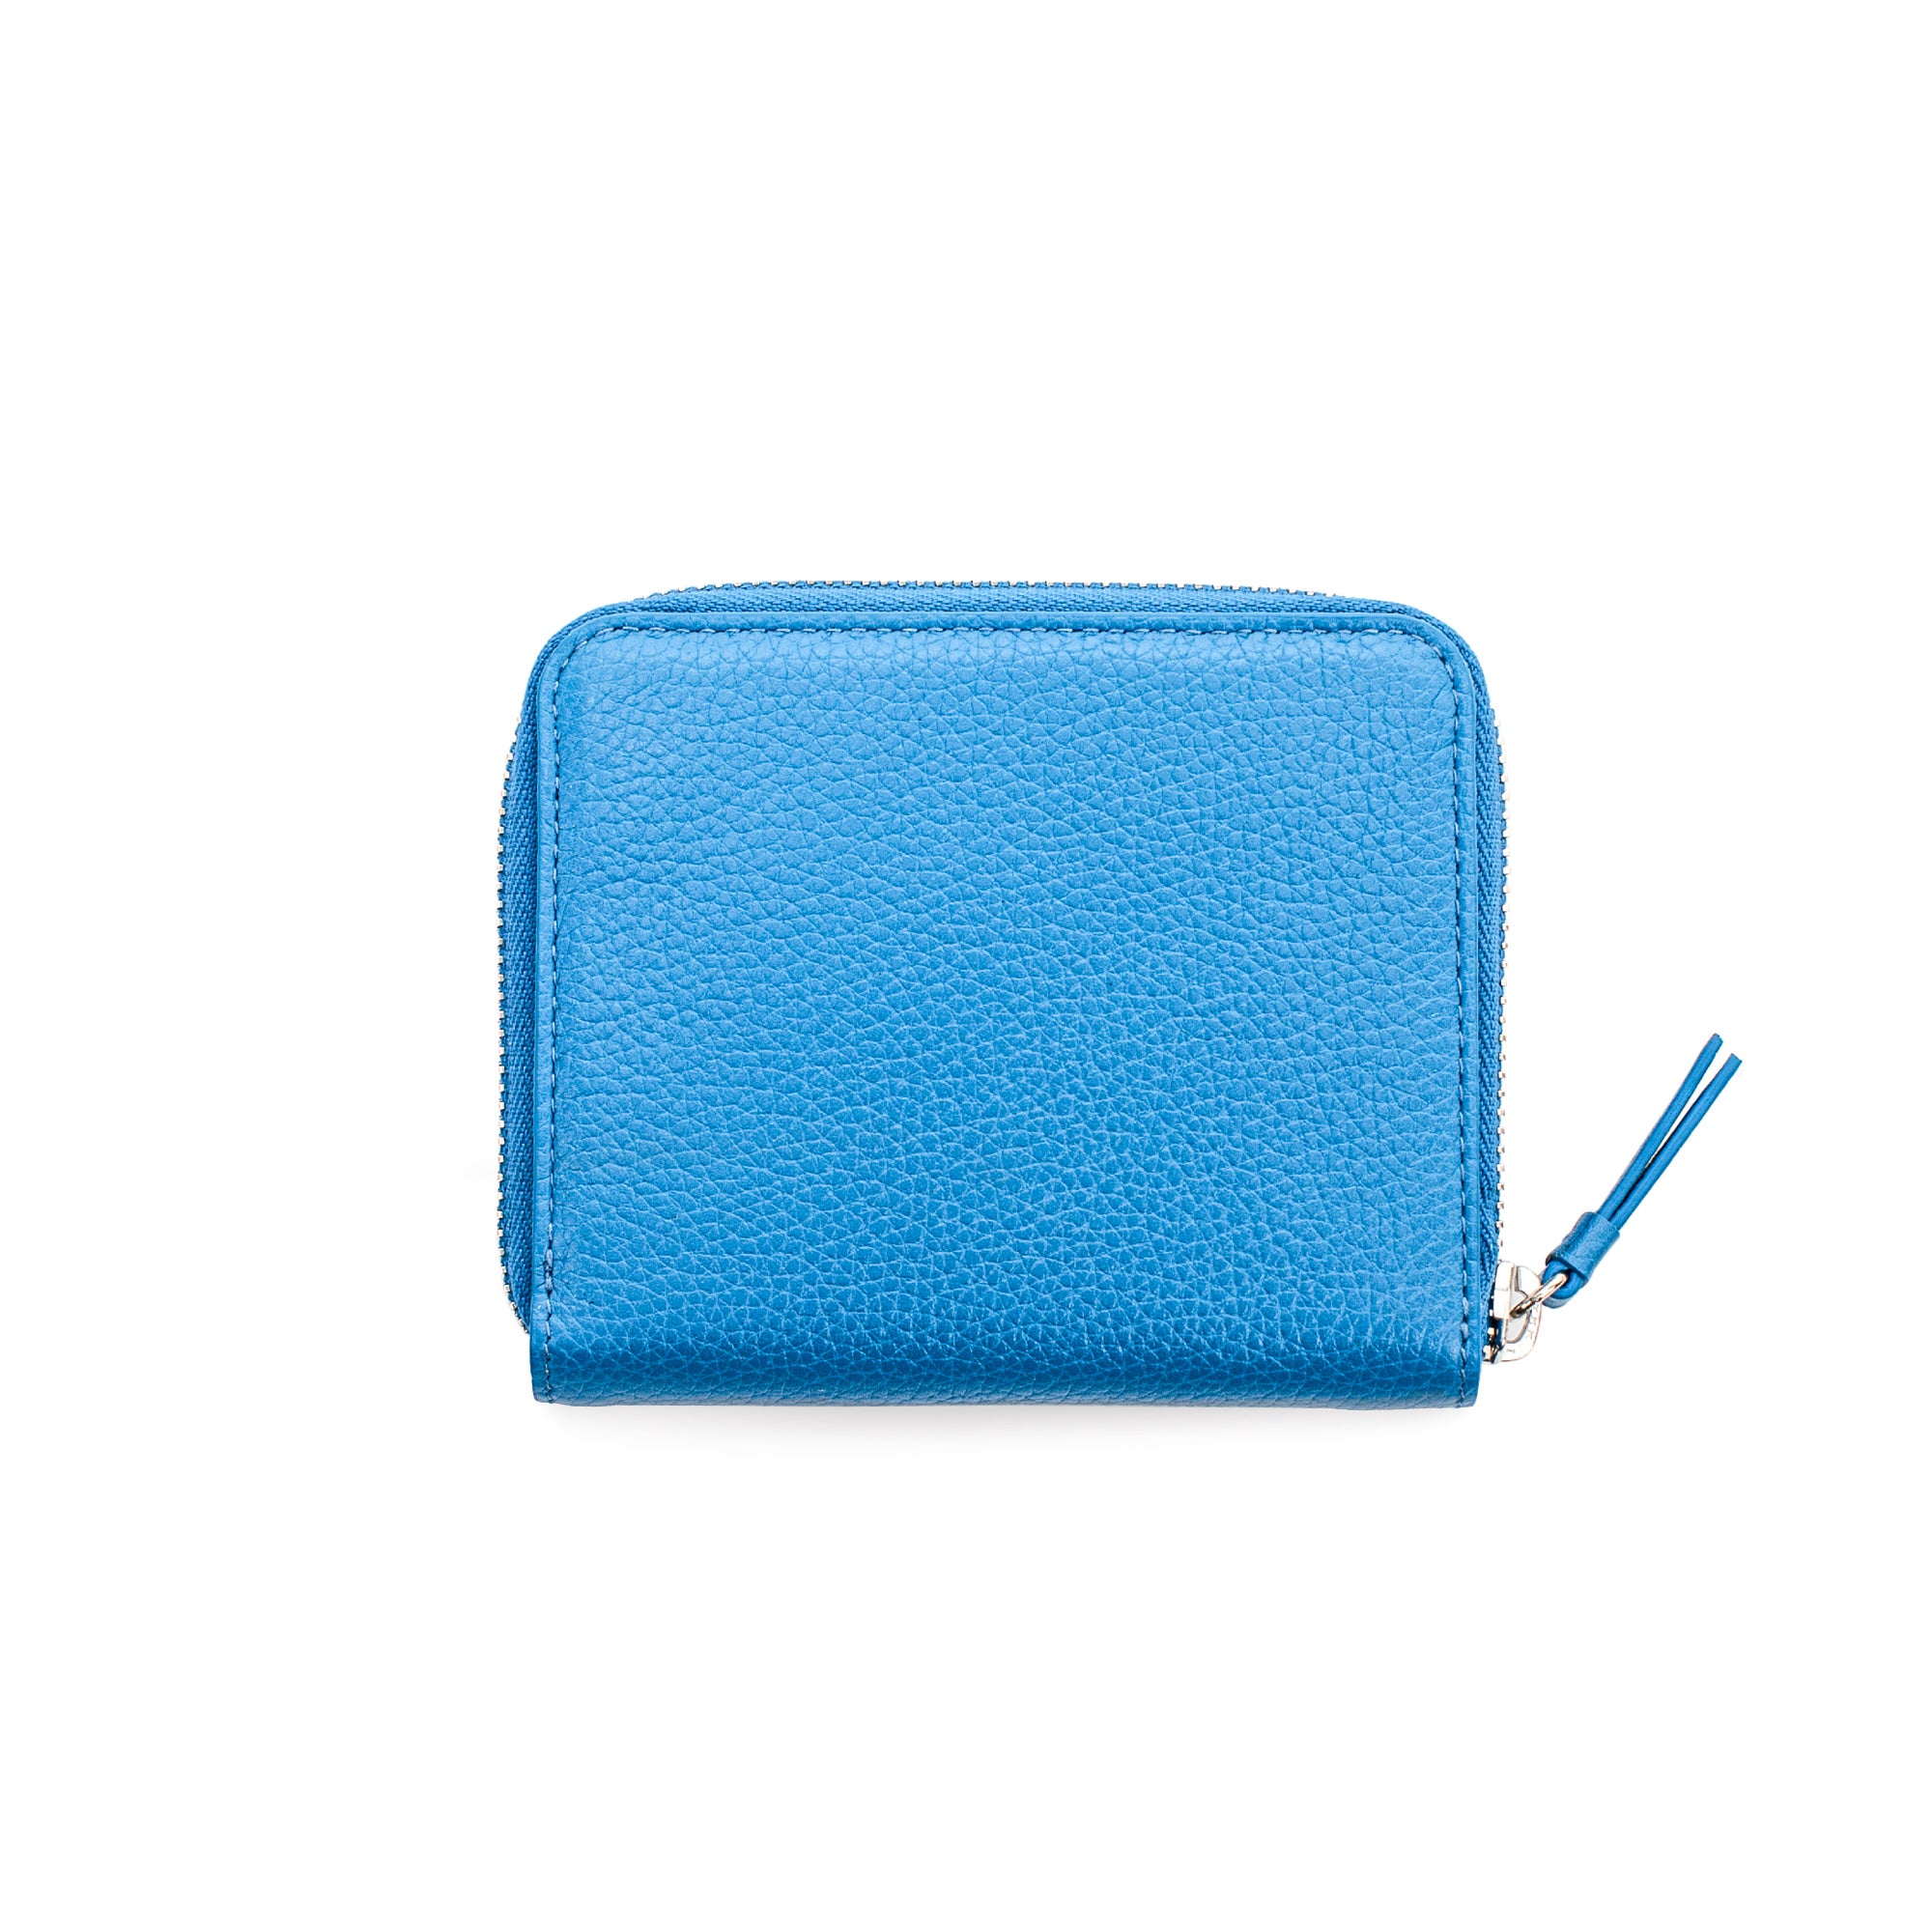 Only 45.00 usd for Medley Zip Wallet Great deals!